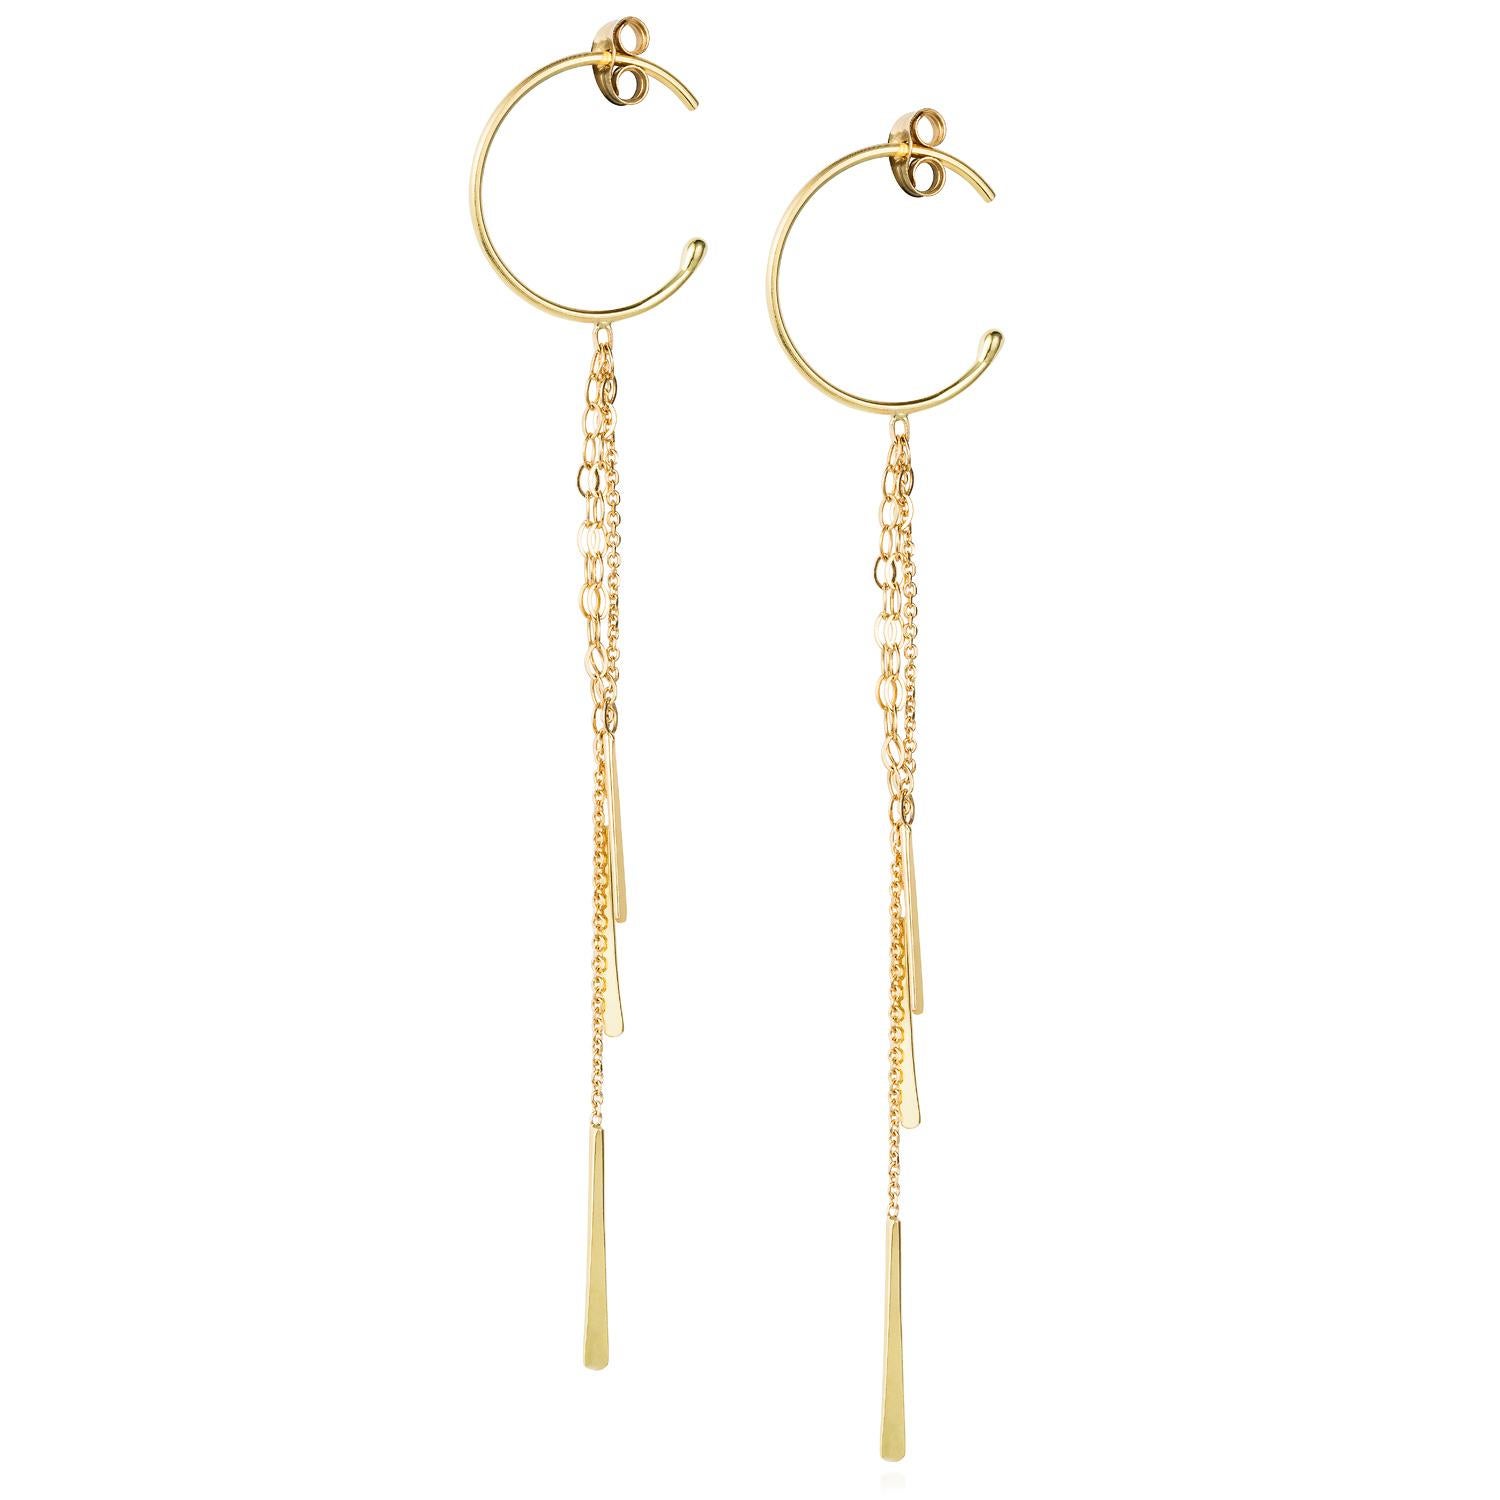 Sweet Pea Sycamore 18k Yellow Gold Small Hoop Earrings With Chains And Bars For Sale